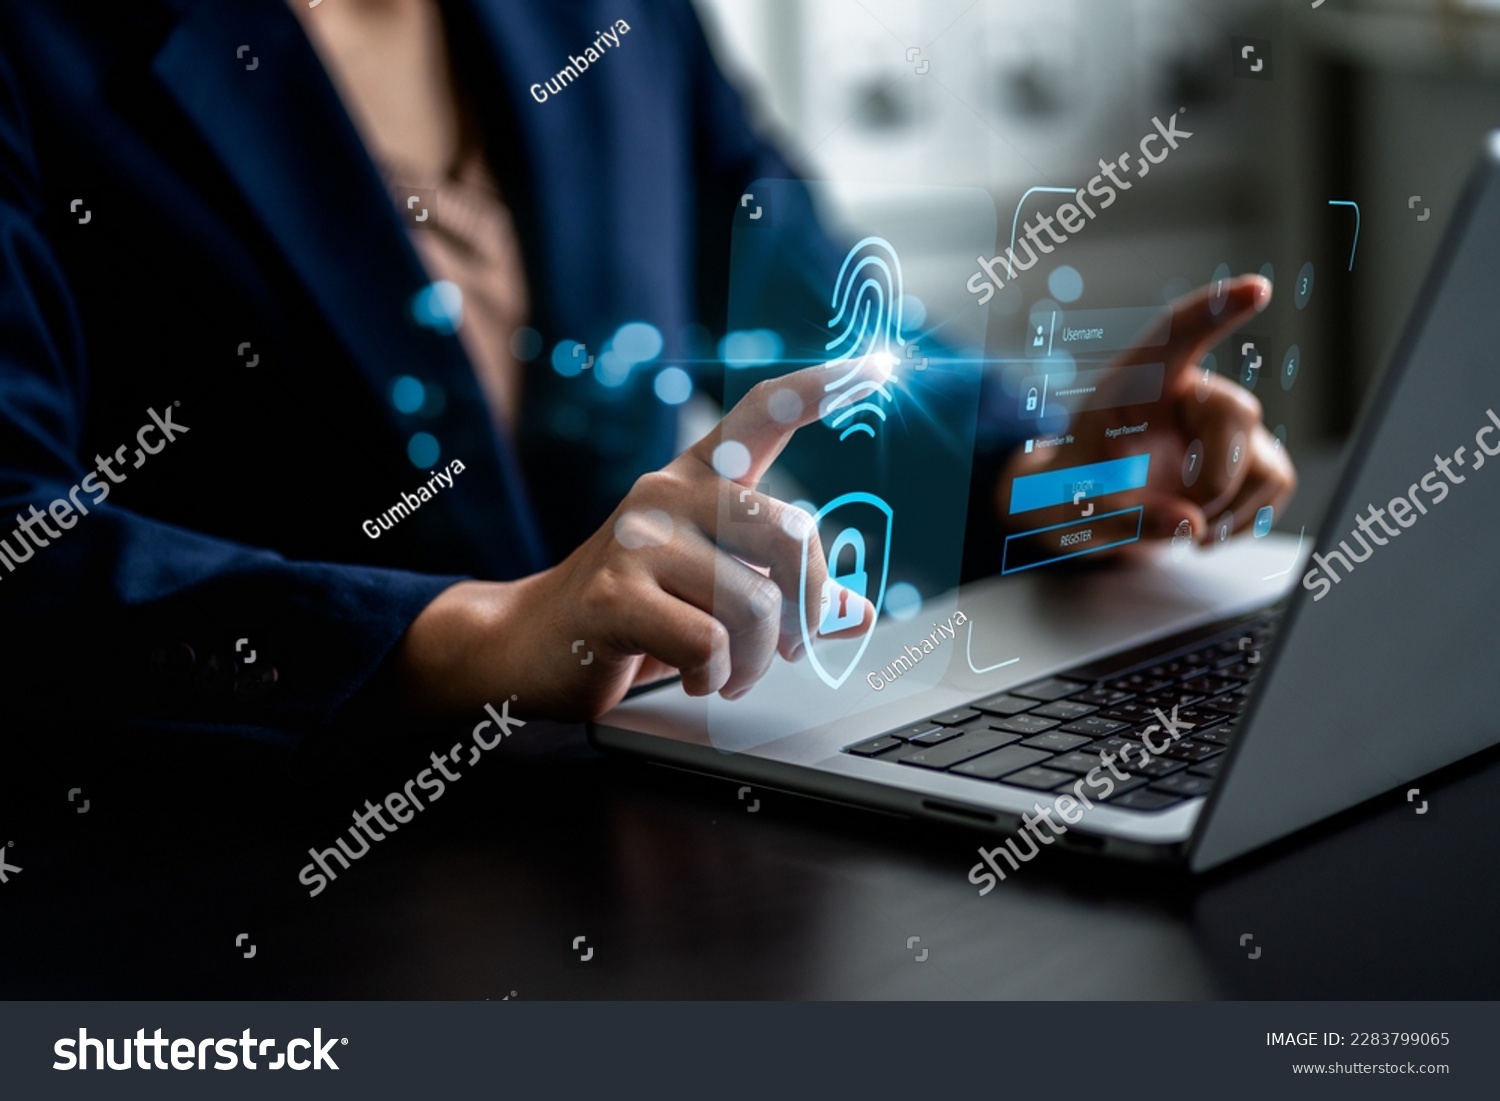 Access security personal financial data on scan fingerprint identification, biometric authentication cybersecurity, technology cybernetics into Big data businesses, Businesswoman login laptop computer #2283799065